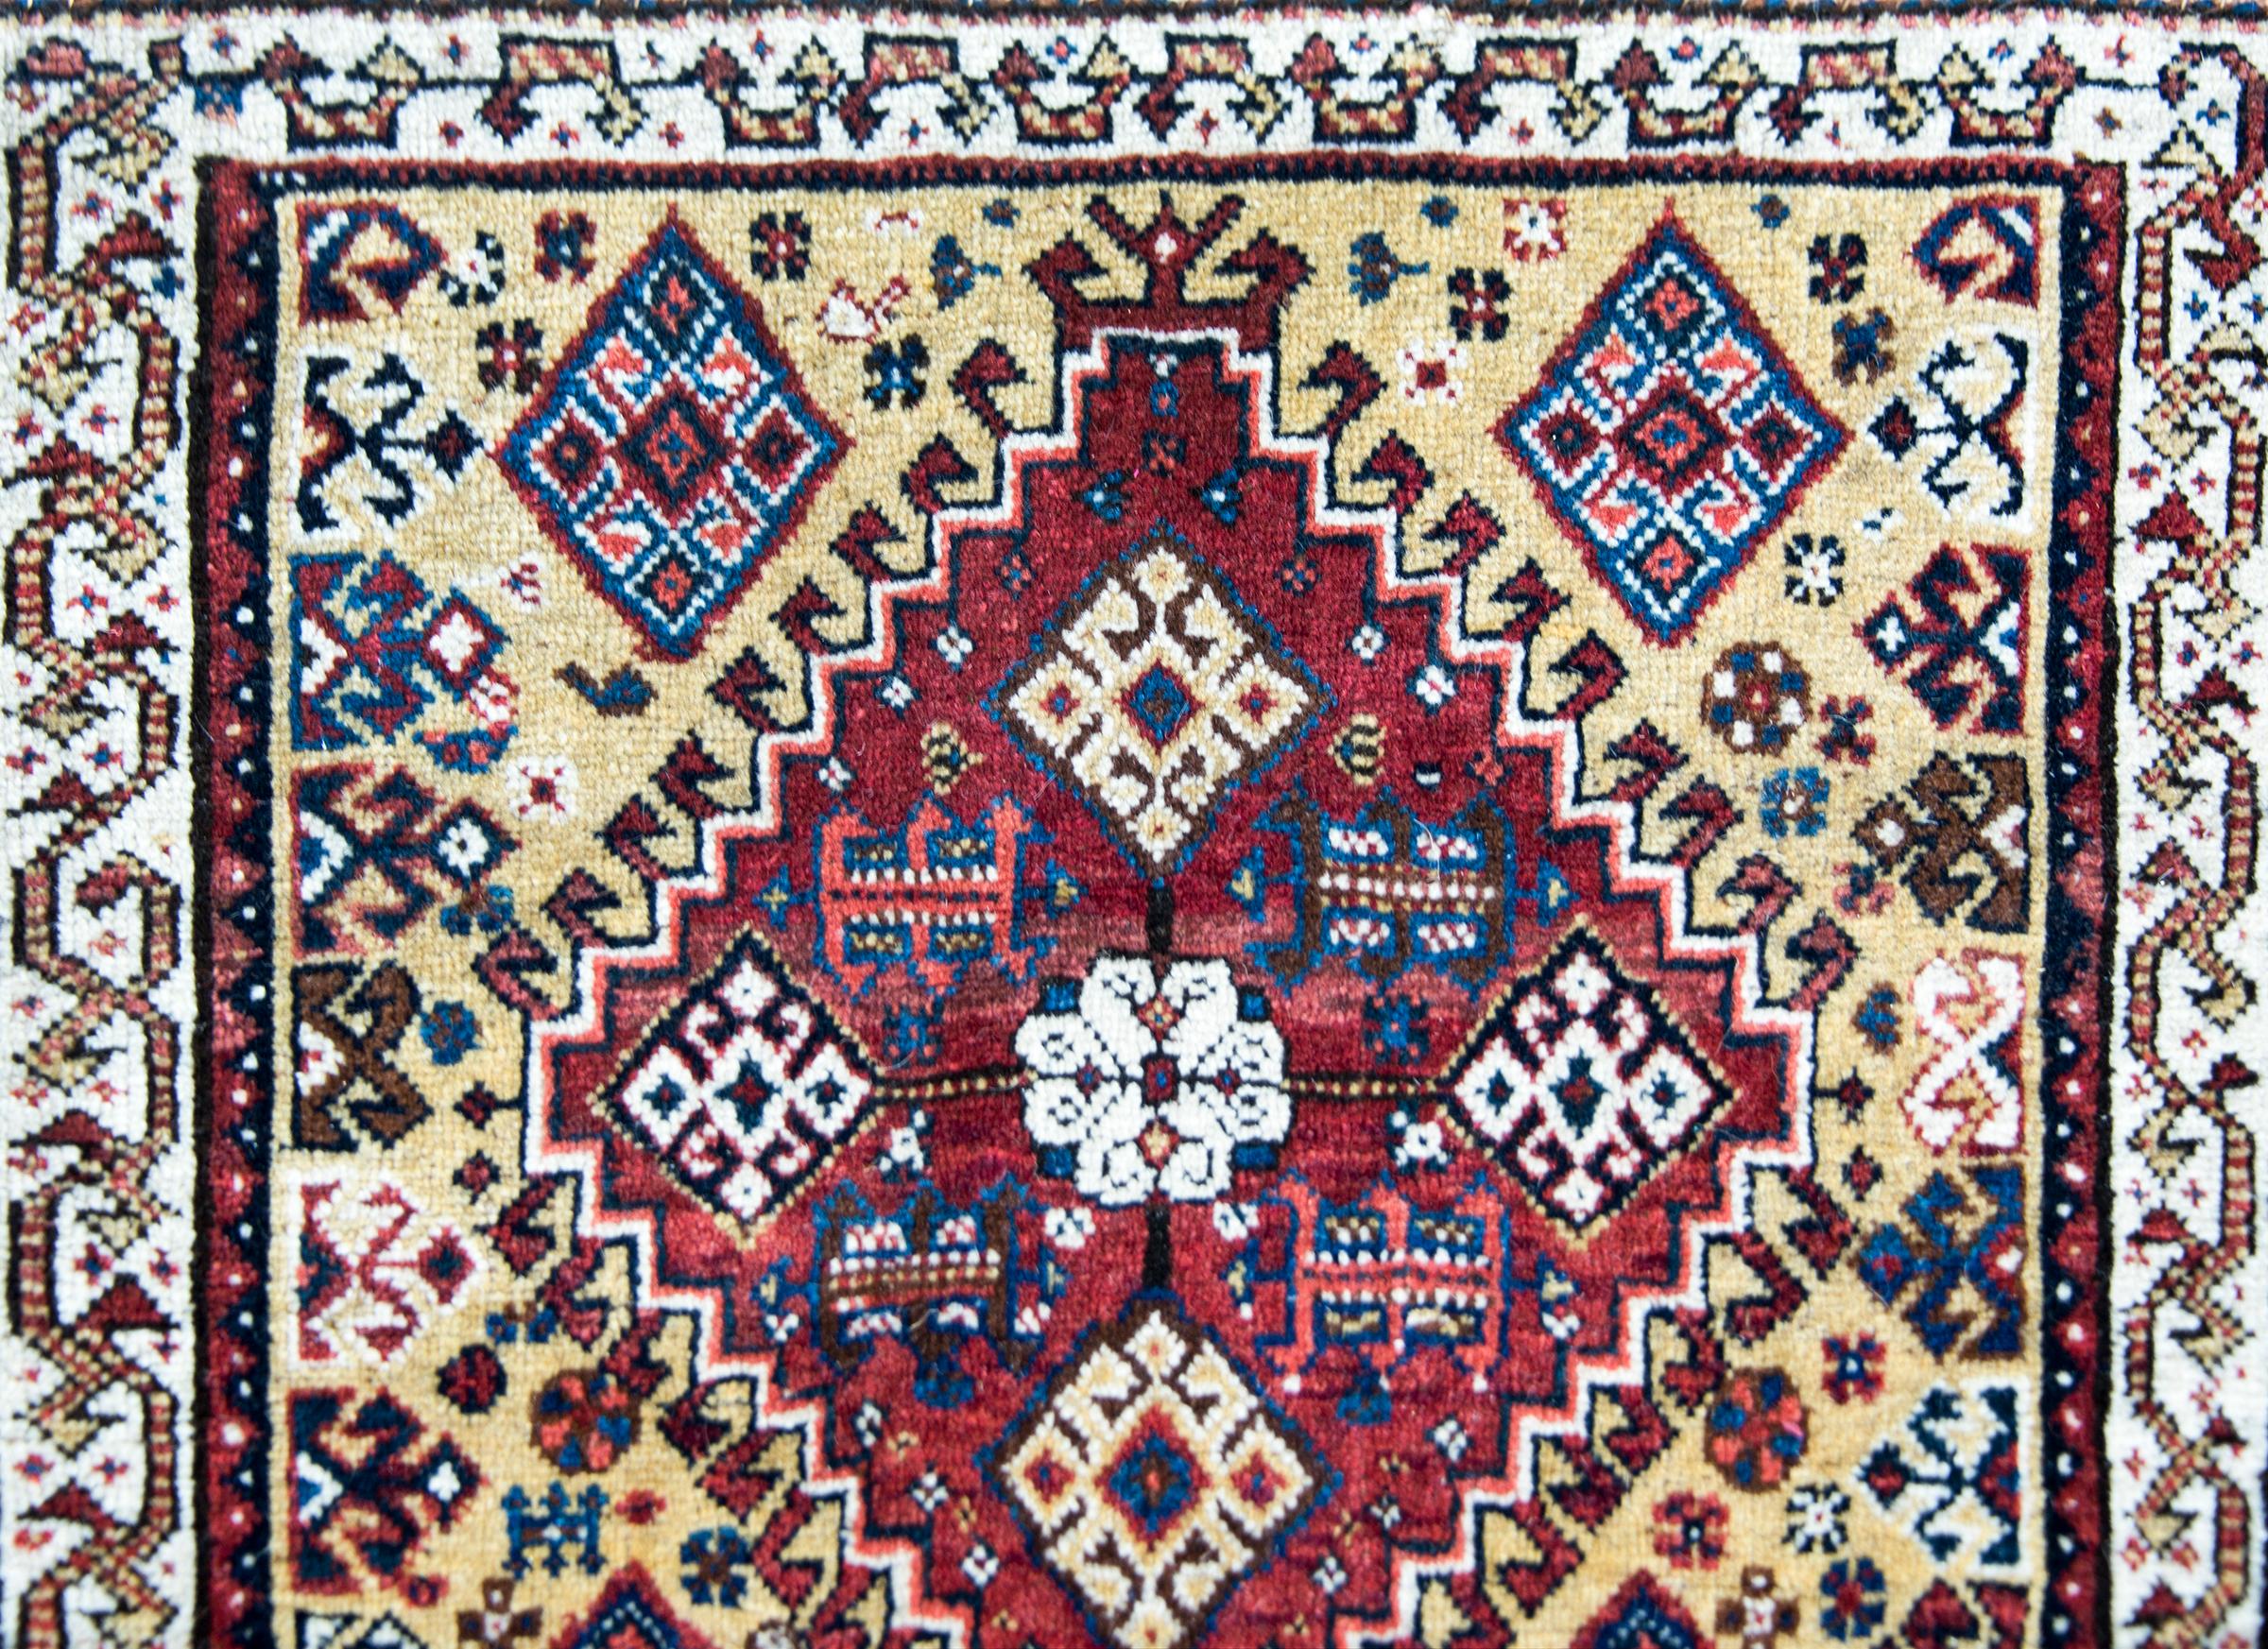 A beautiful early 20th century Persian Afshar rug with a large central central diamond pattern with stylized flowers woven in crimson, white, indigo, and yellow, and surrounded by a border with stylized scrolling vine patterns.